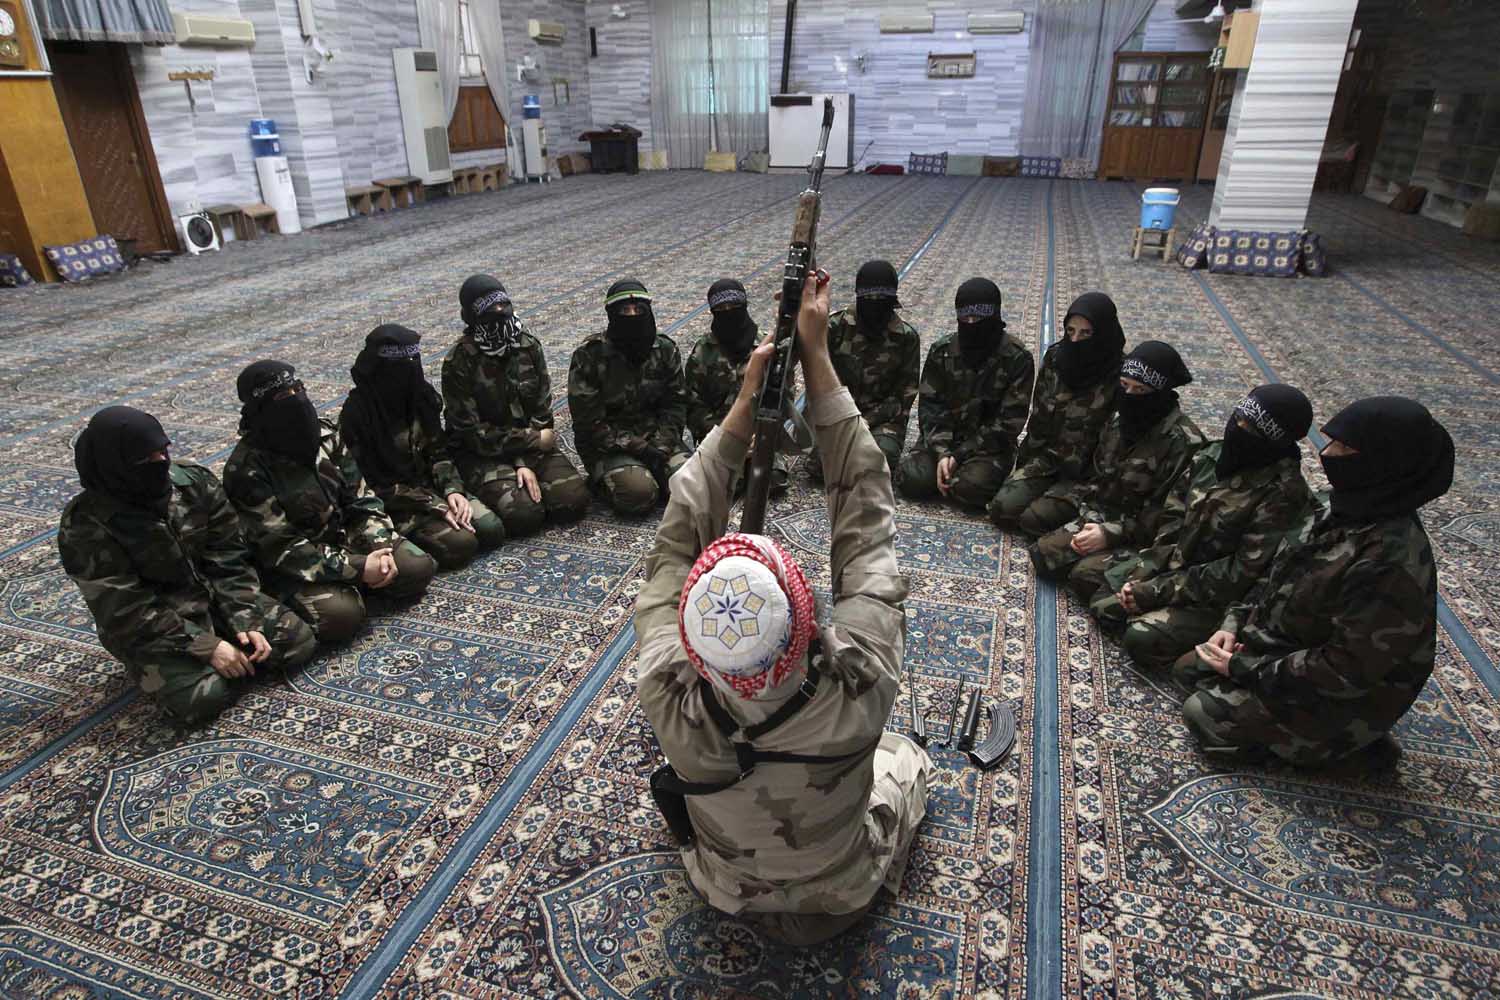 June 24, 2013. Abu al-Taib, the leader of Ahbab Al-Mustafa Battalion, demonstrates to female members as he holds a gun during a military training in a mosque in the Seif El Dawla neighbourhood in Aleppo, Syria.